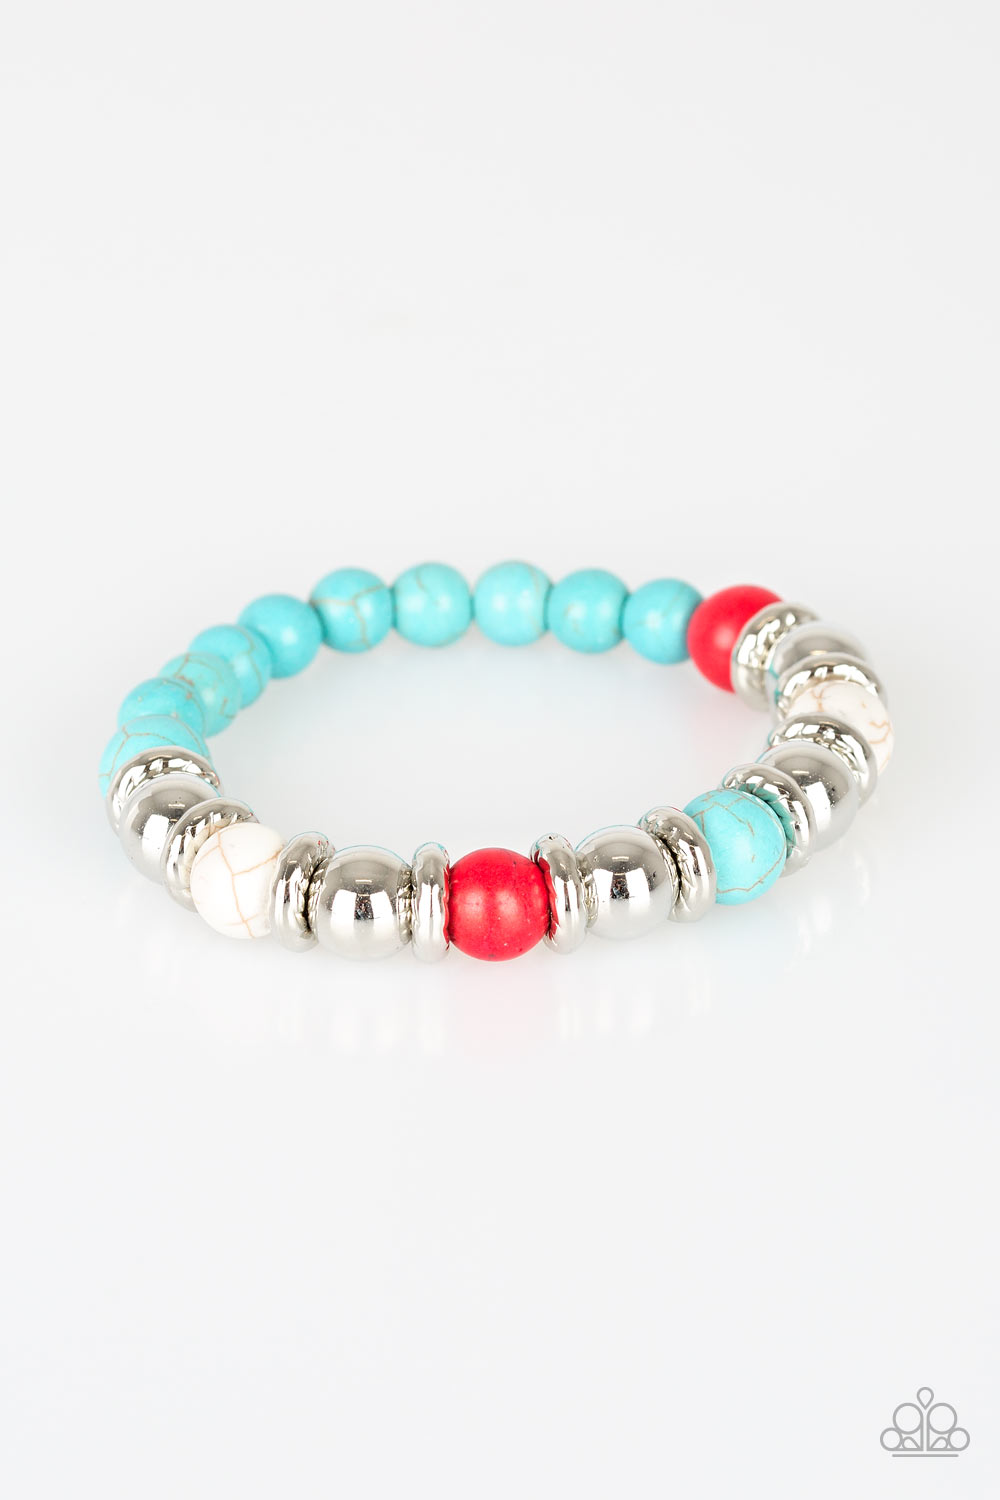 ACROSS THE MESA - MULTI RED BLUE WHITE  POLISHED NATURAL CRACKLE STONE STRETCH BRACELET